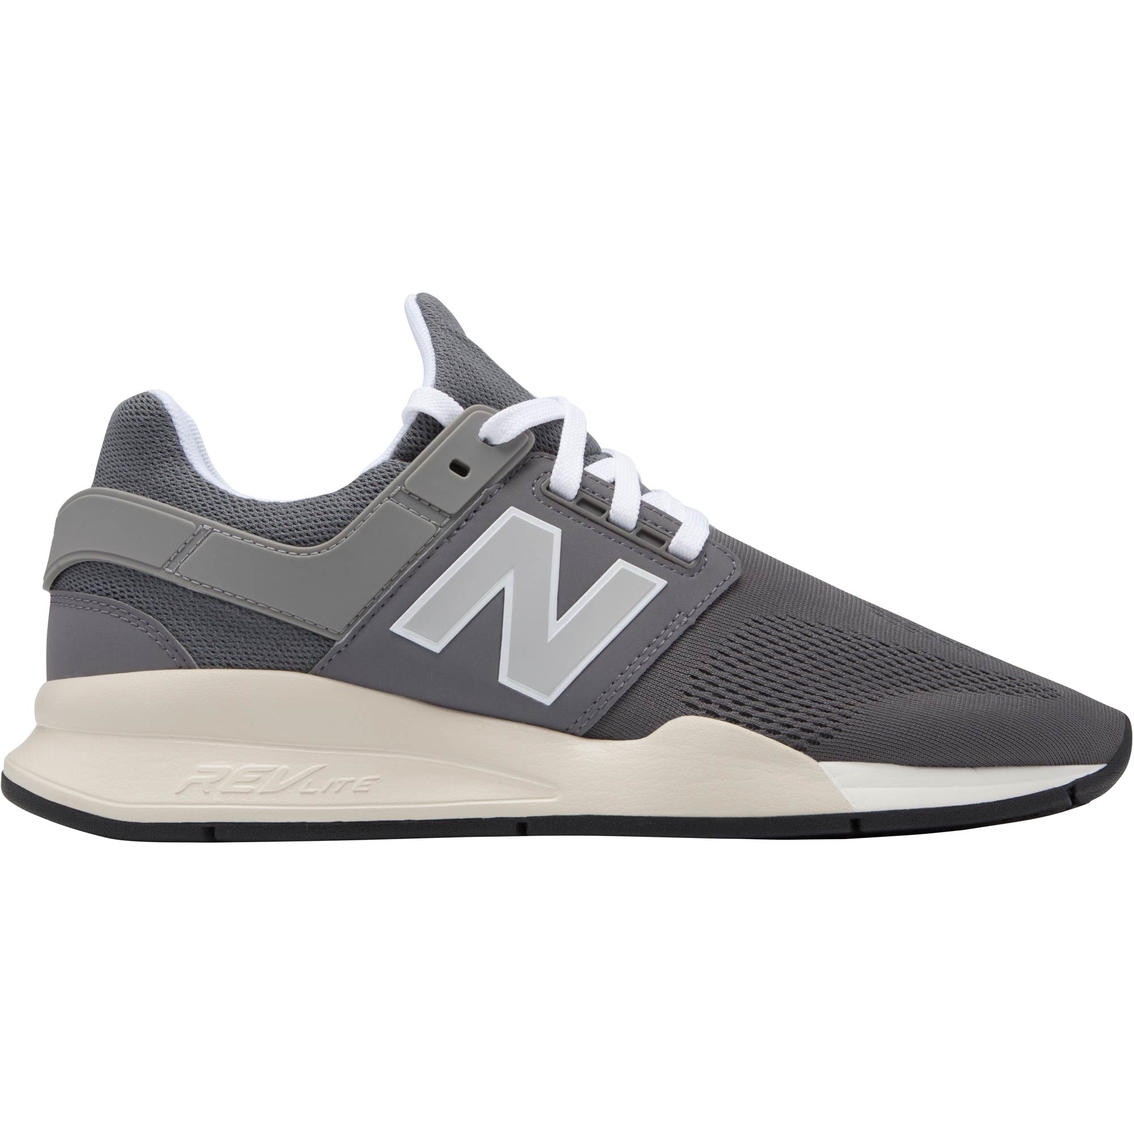 new balance mens athletic shoes